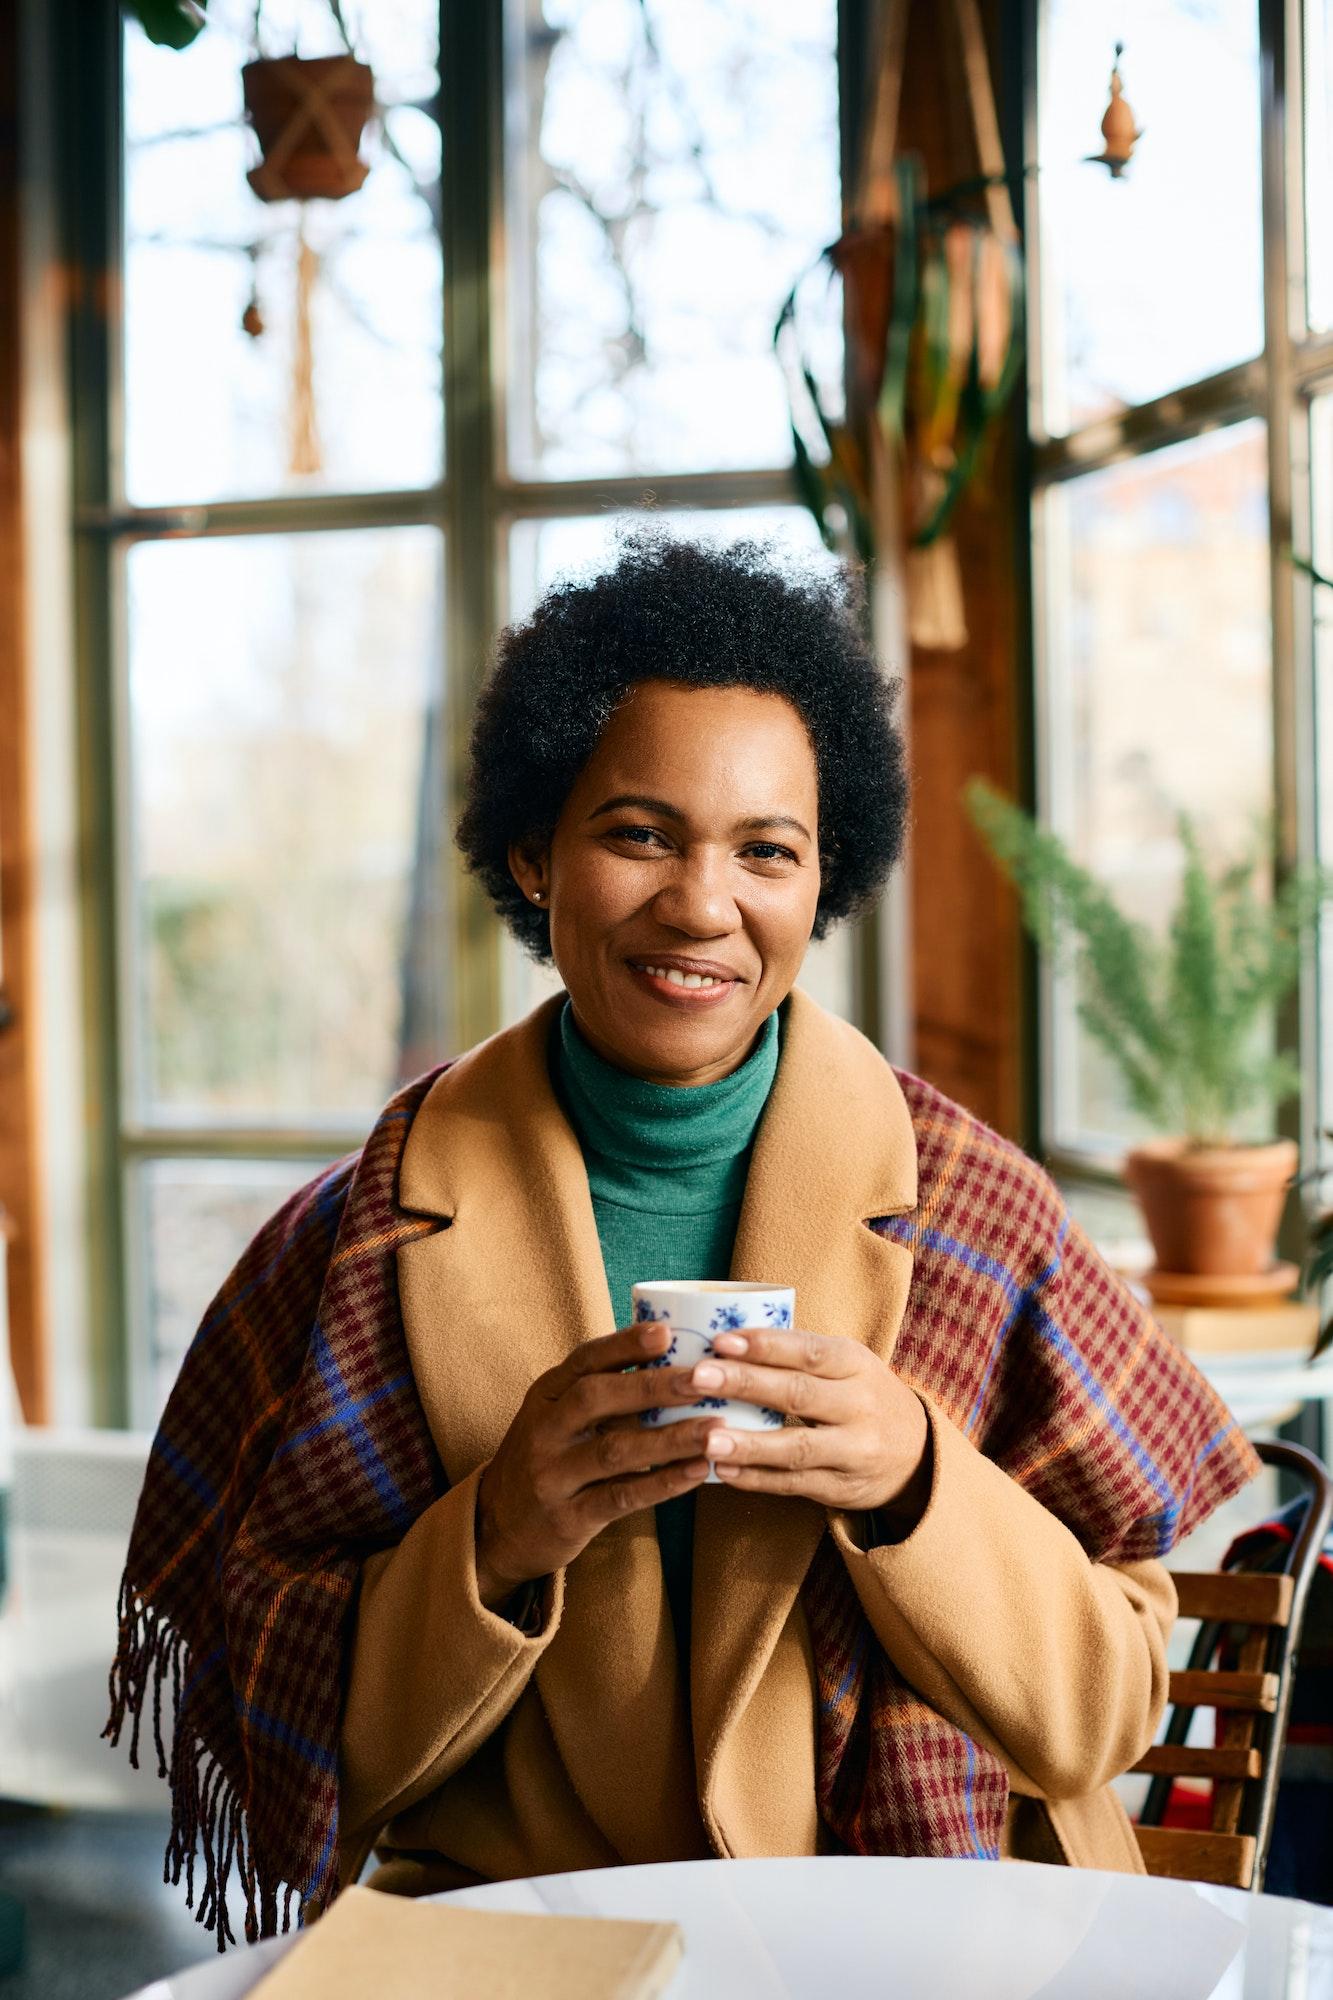 Happy African American woman enjoying in cup of tea in cafe during winter season.